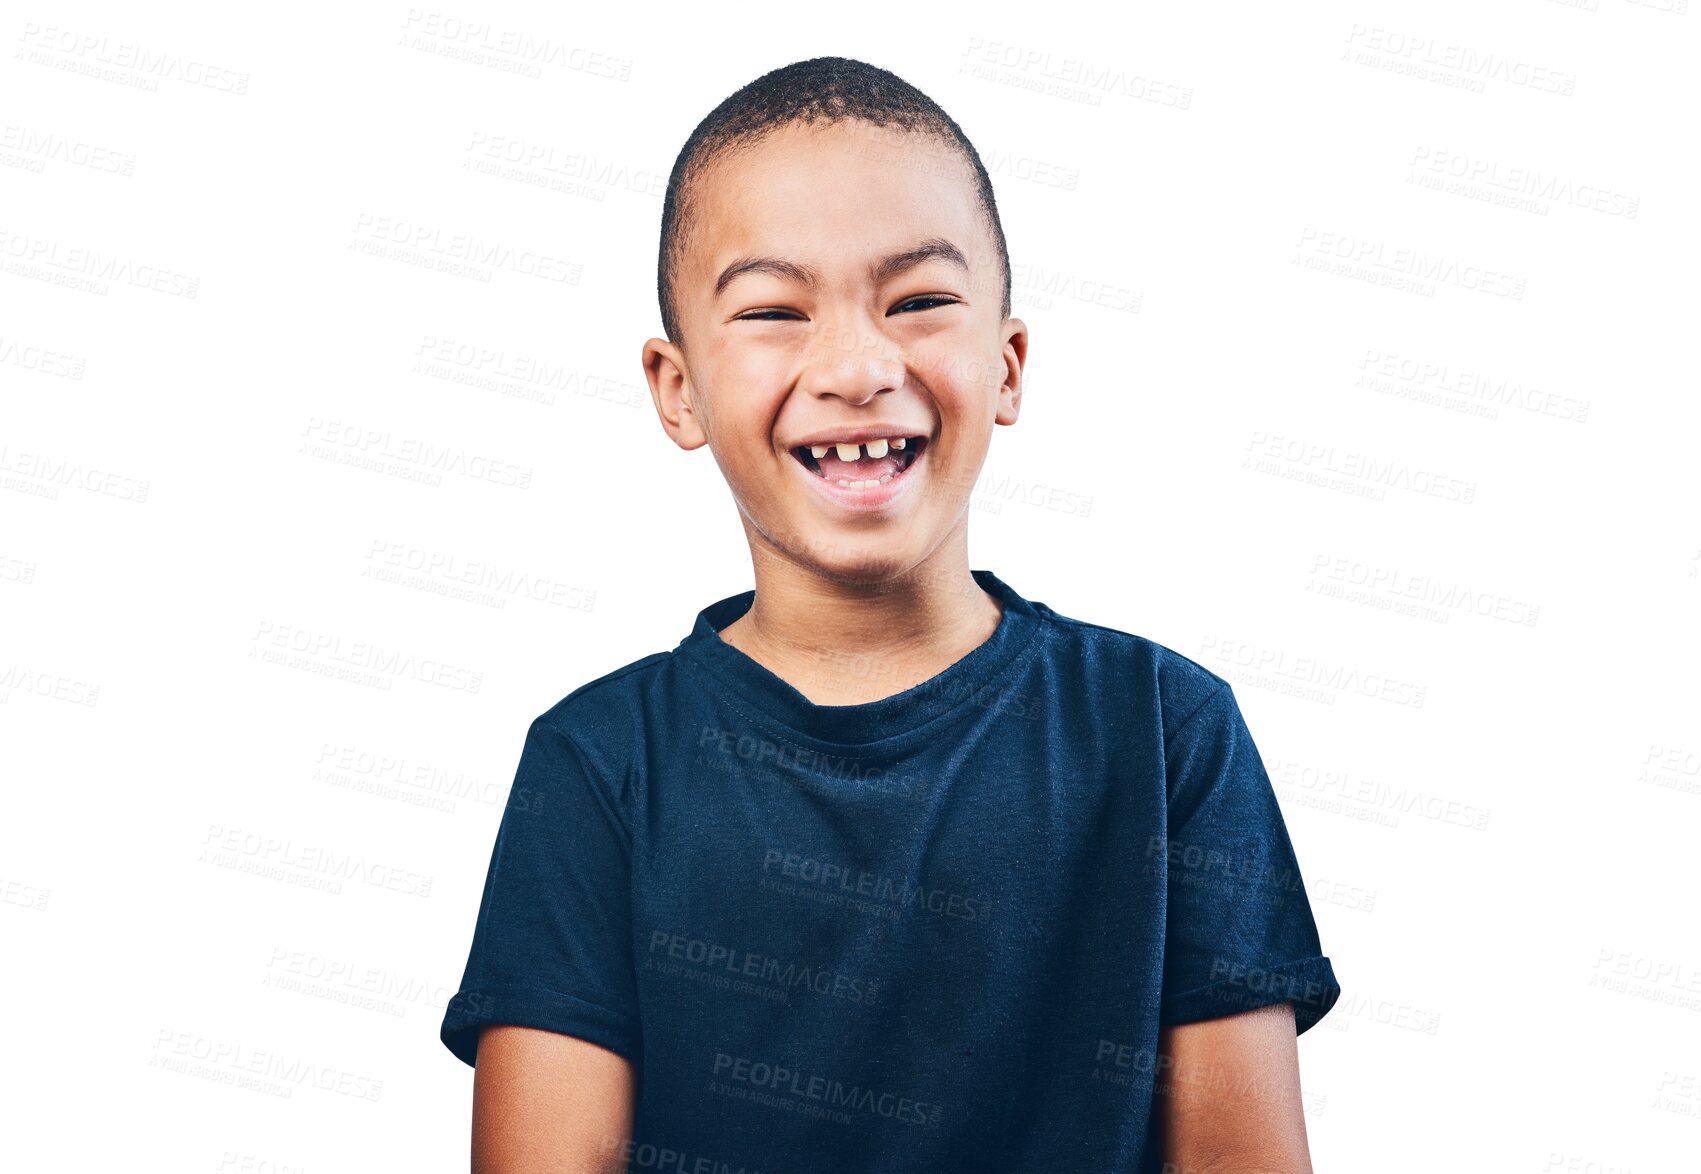 Buy stock photo Laugh, funny and portrait of child on isolated background for comic, crazy and happy. Smile, humor and happiness with face of young person laughing isolated on png for cheerful, carefree and joy